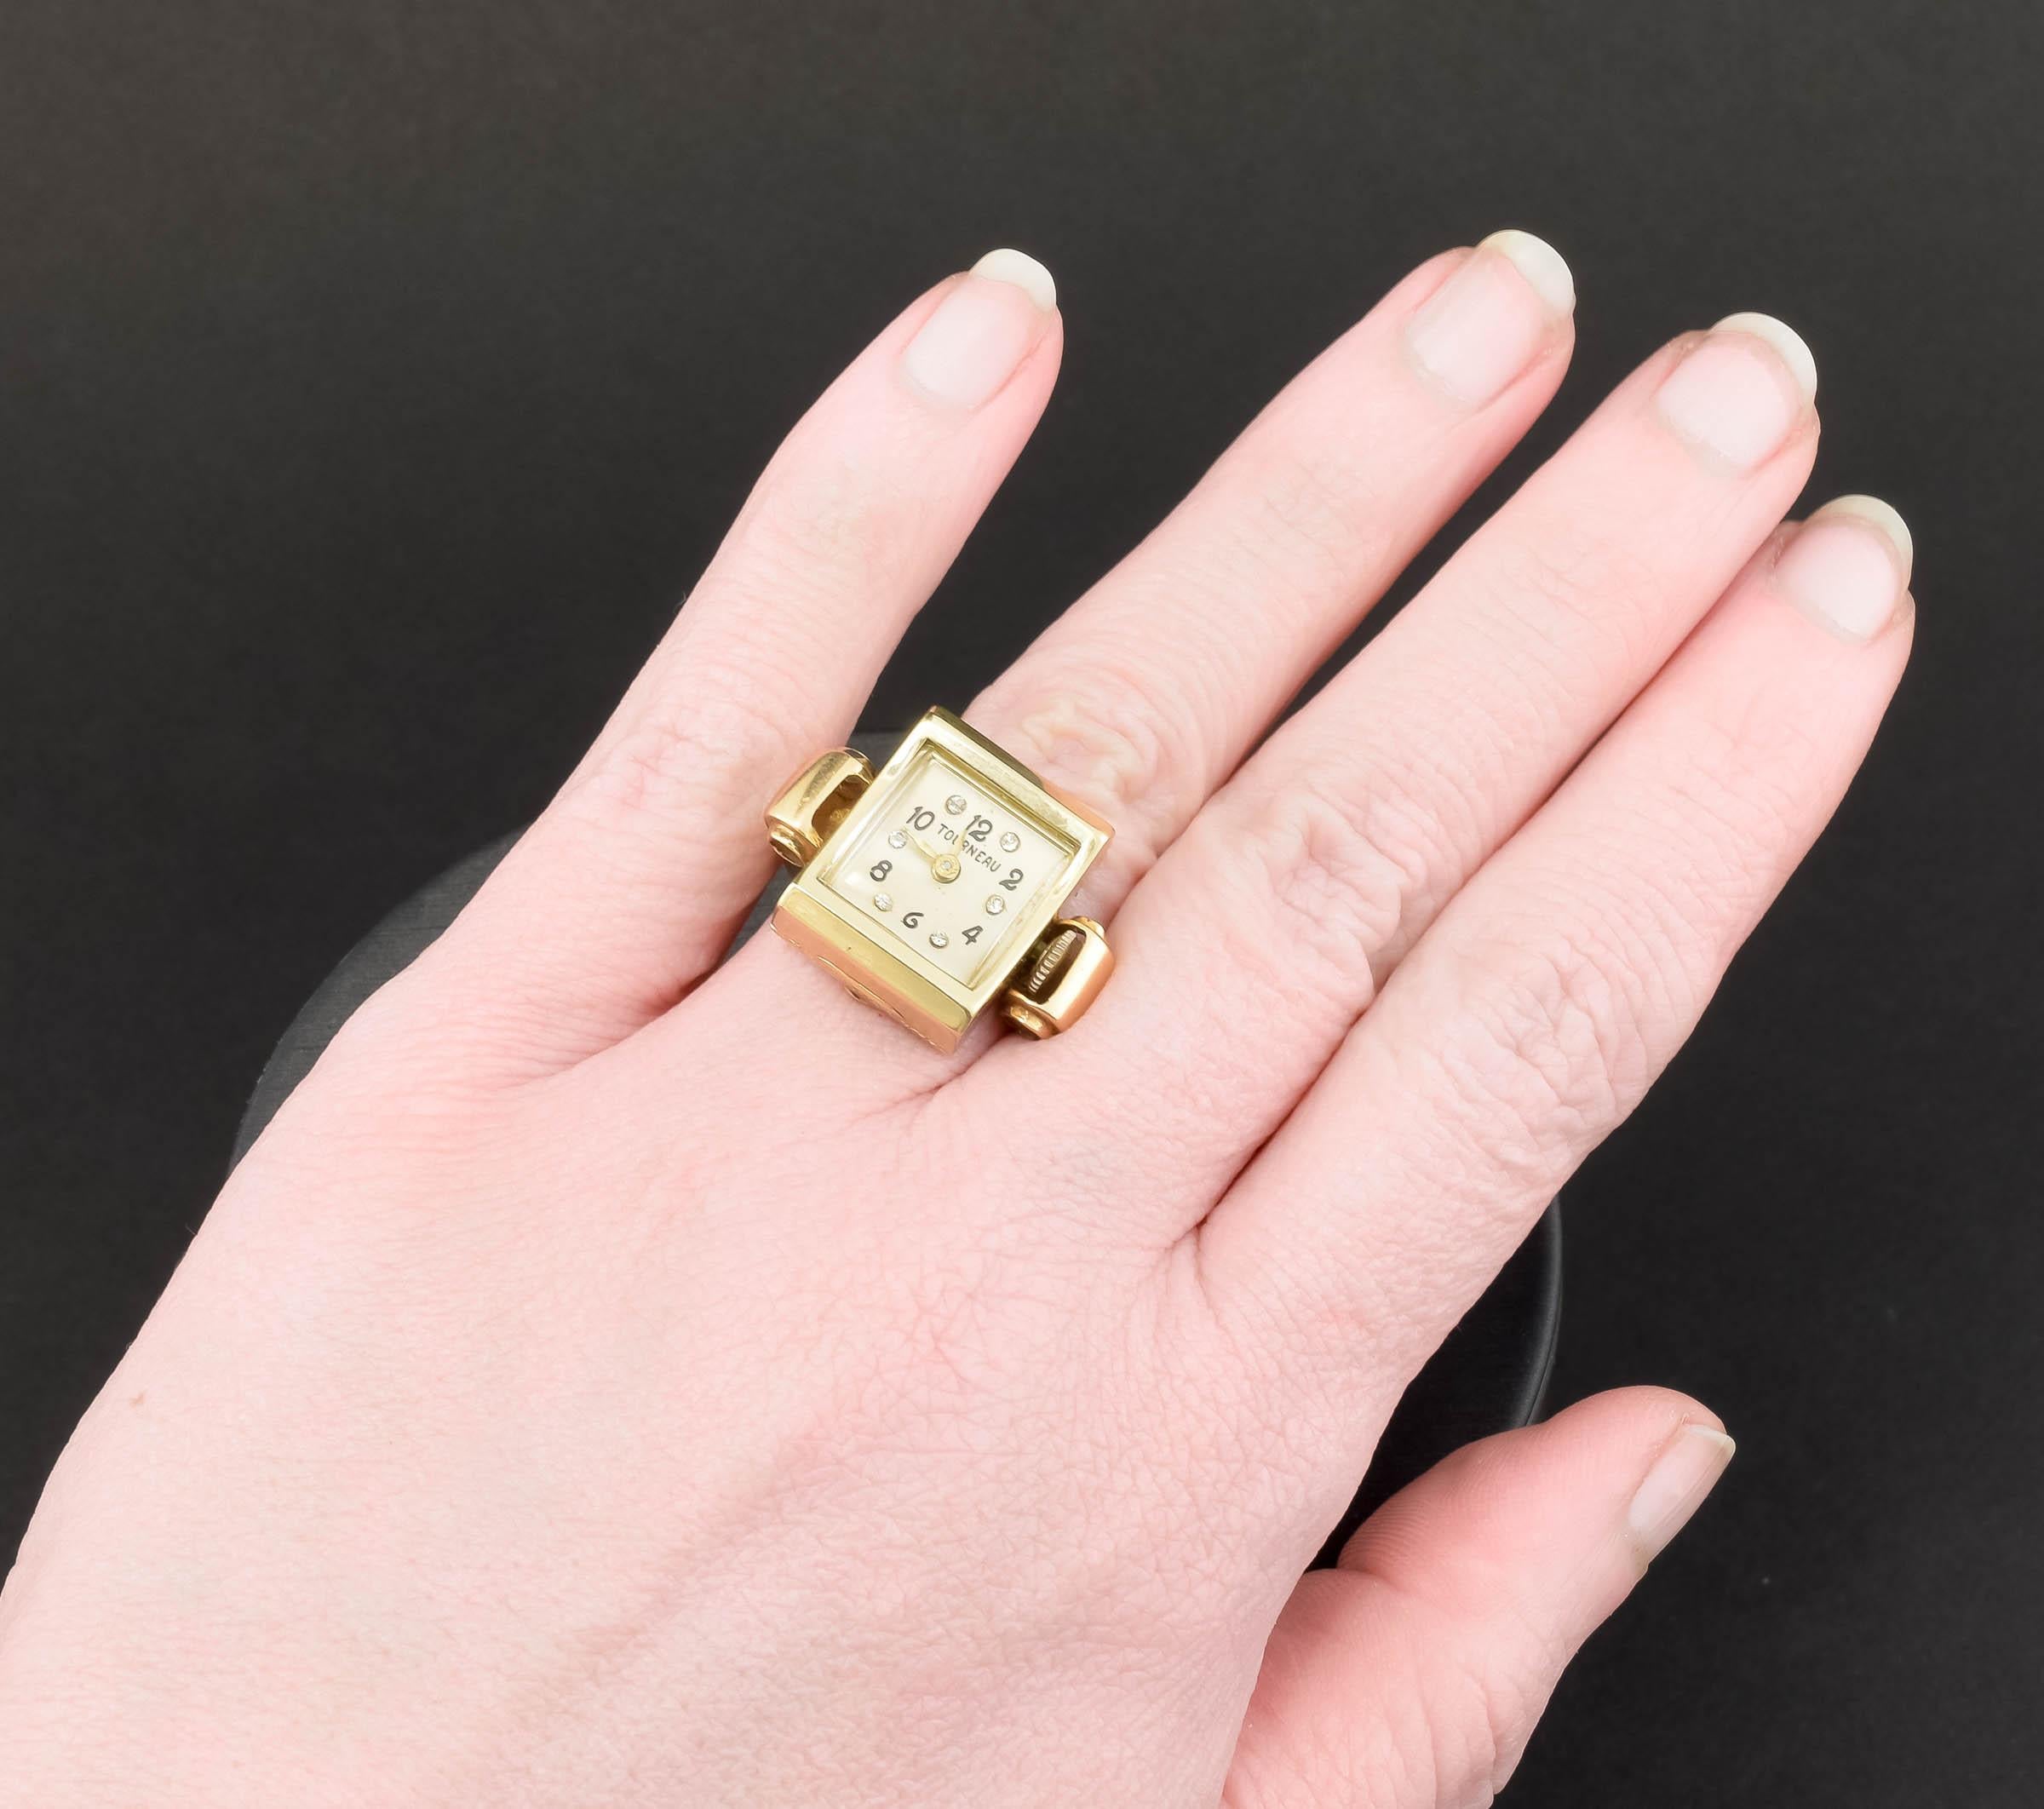 Retro 1940s Tourneau Watch Ring in 14k Gold with Provenance 3